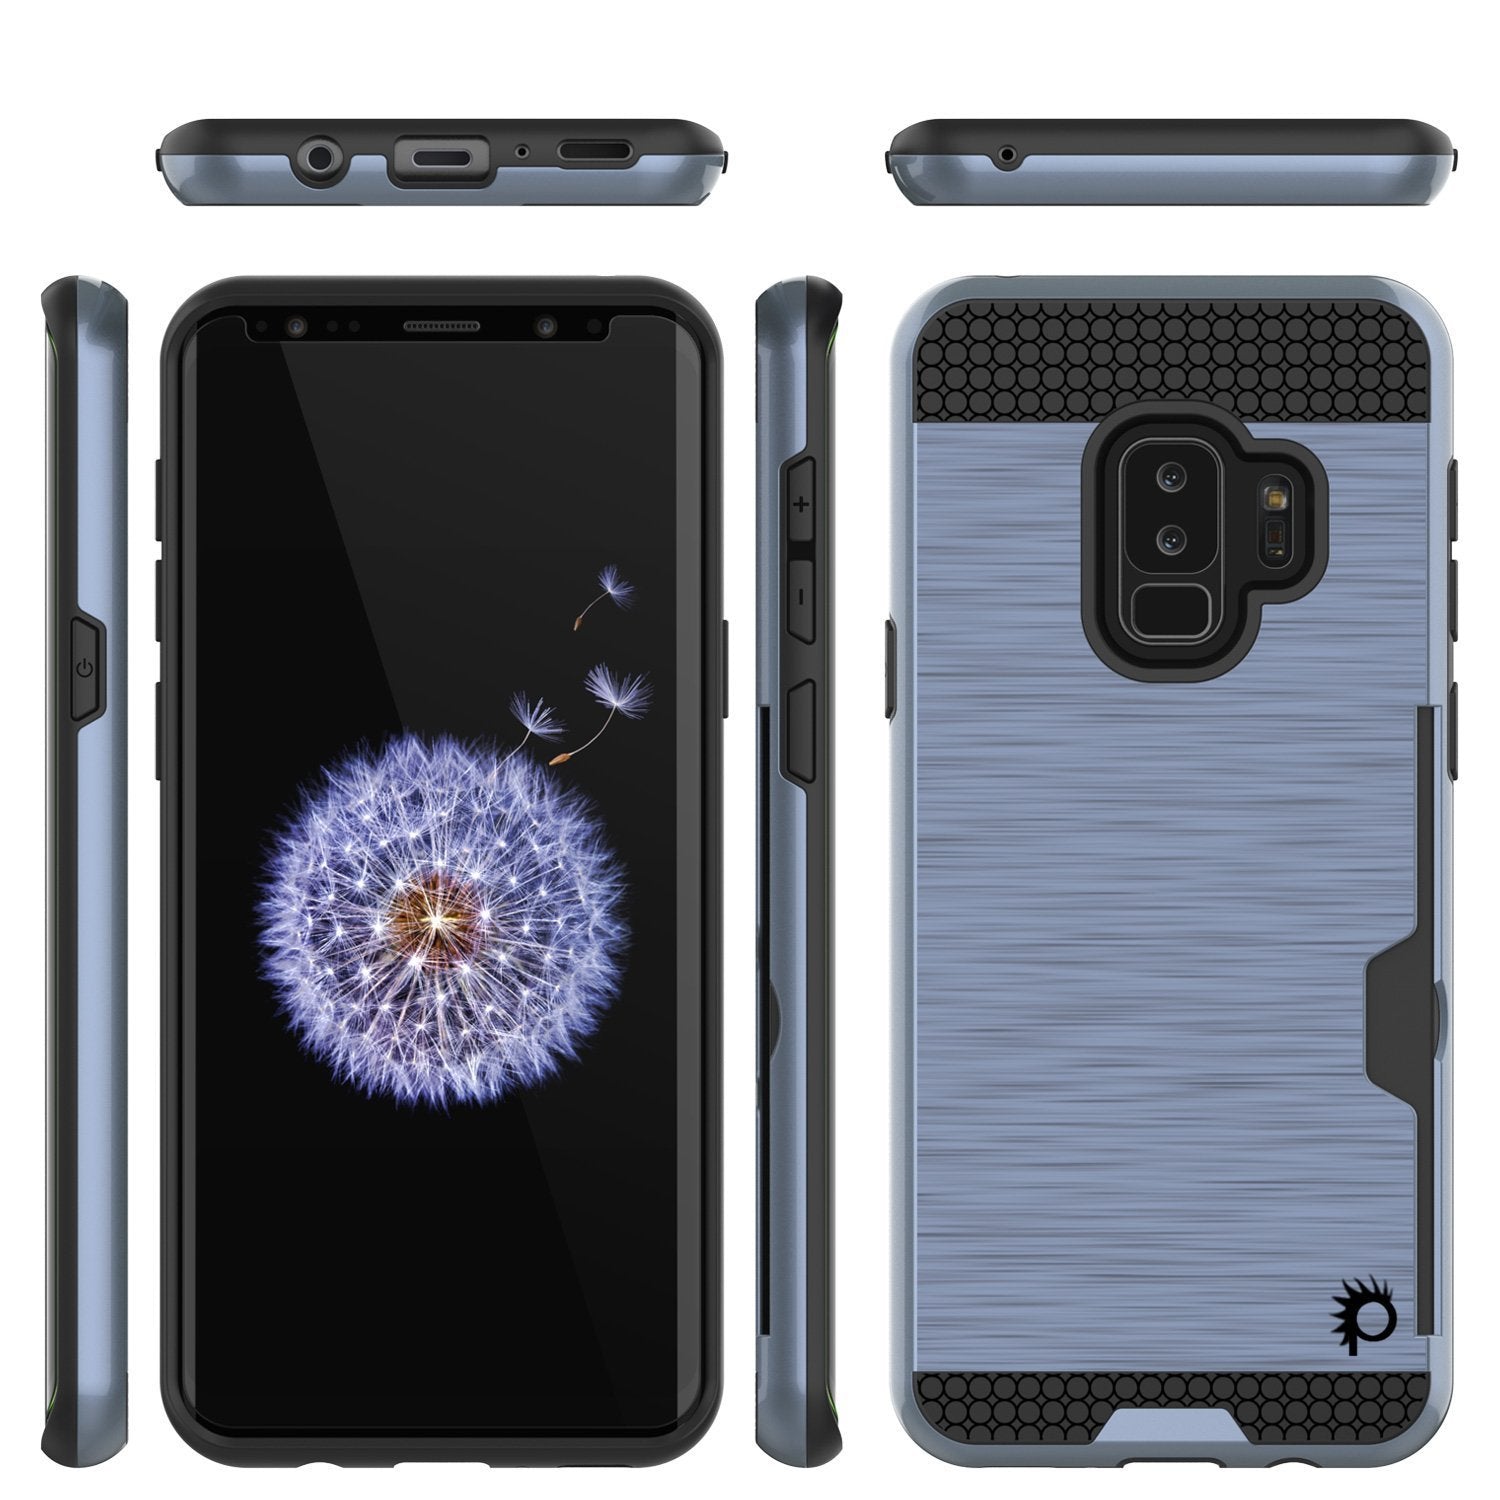 Galaxy S9 Plus Case, PUNKcase [SLOT Series] [Slim Fit] Dual-Layer Armor Cover w/Integrated Anti-Shock System, Credit Card Slot [Navy]